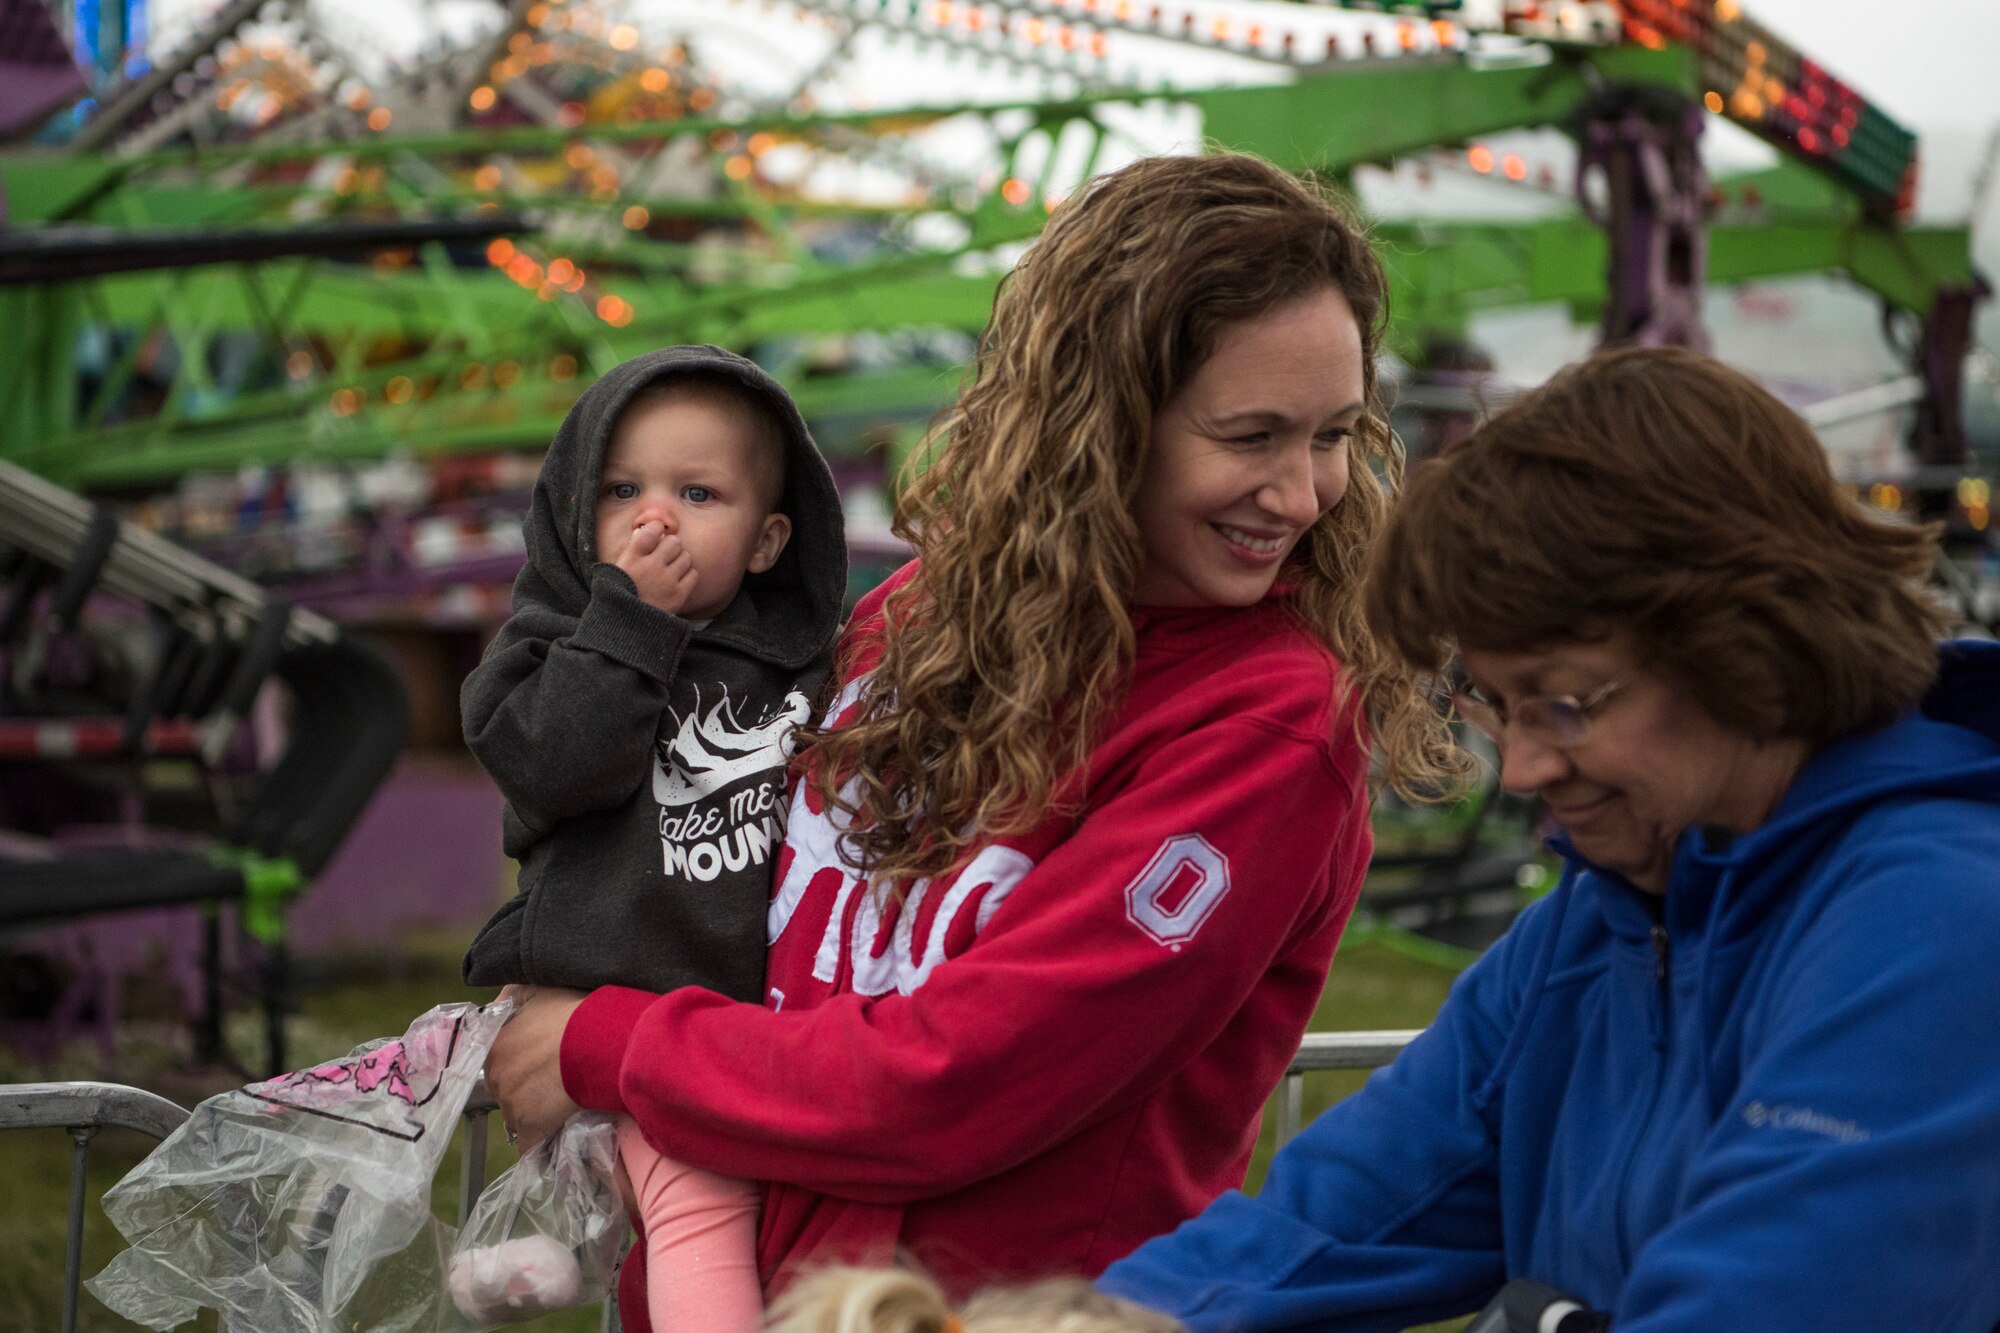 Hailey, 1, is held by her aunt, Jama Singh, as she eats cotton candy during the 3rd annual Summer Fest hosted by the 673d Force Support Squadron at Joint Base Elmendorf-Richardson, Alaska, July 8, 2018. The event was open to anyone with base access and offered free activities such as carnival rides, a petting zoo, face painting, a bungee trampoline, and carnival games.